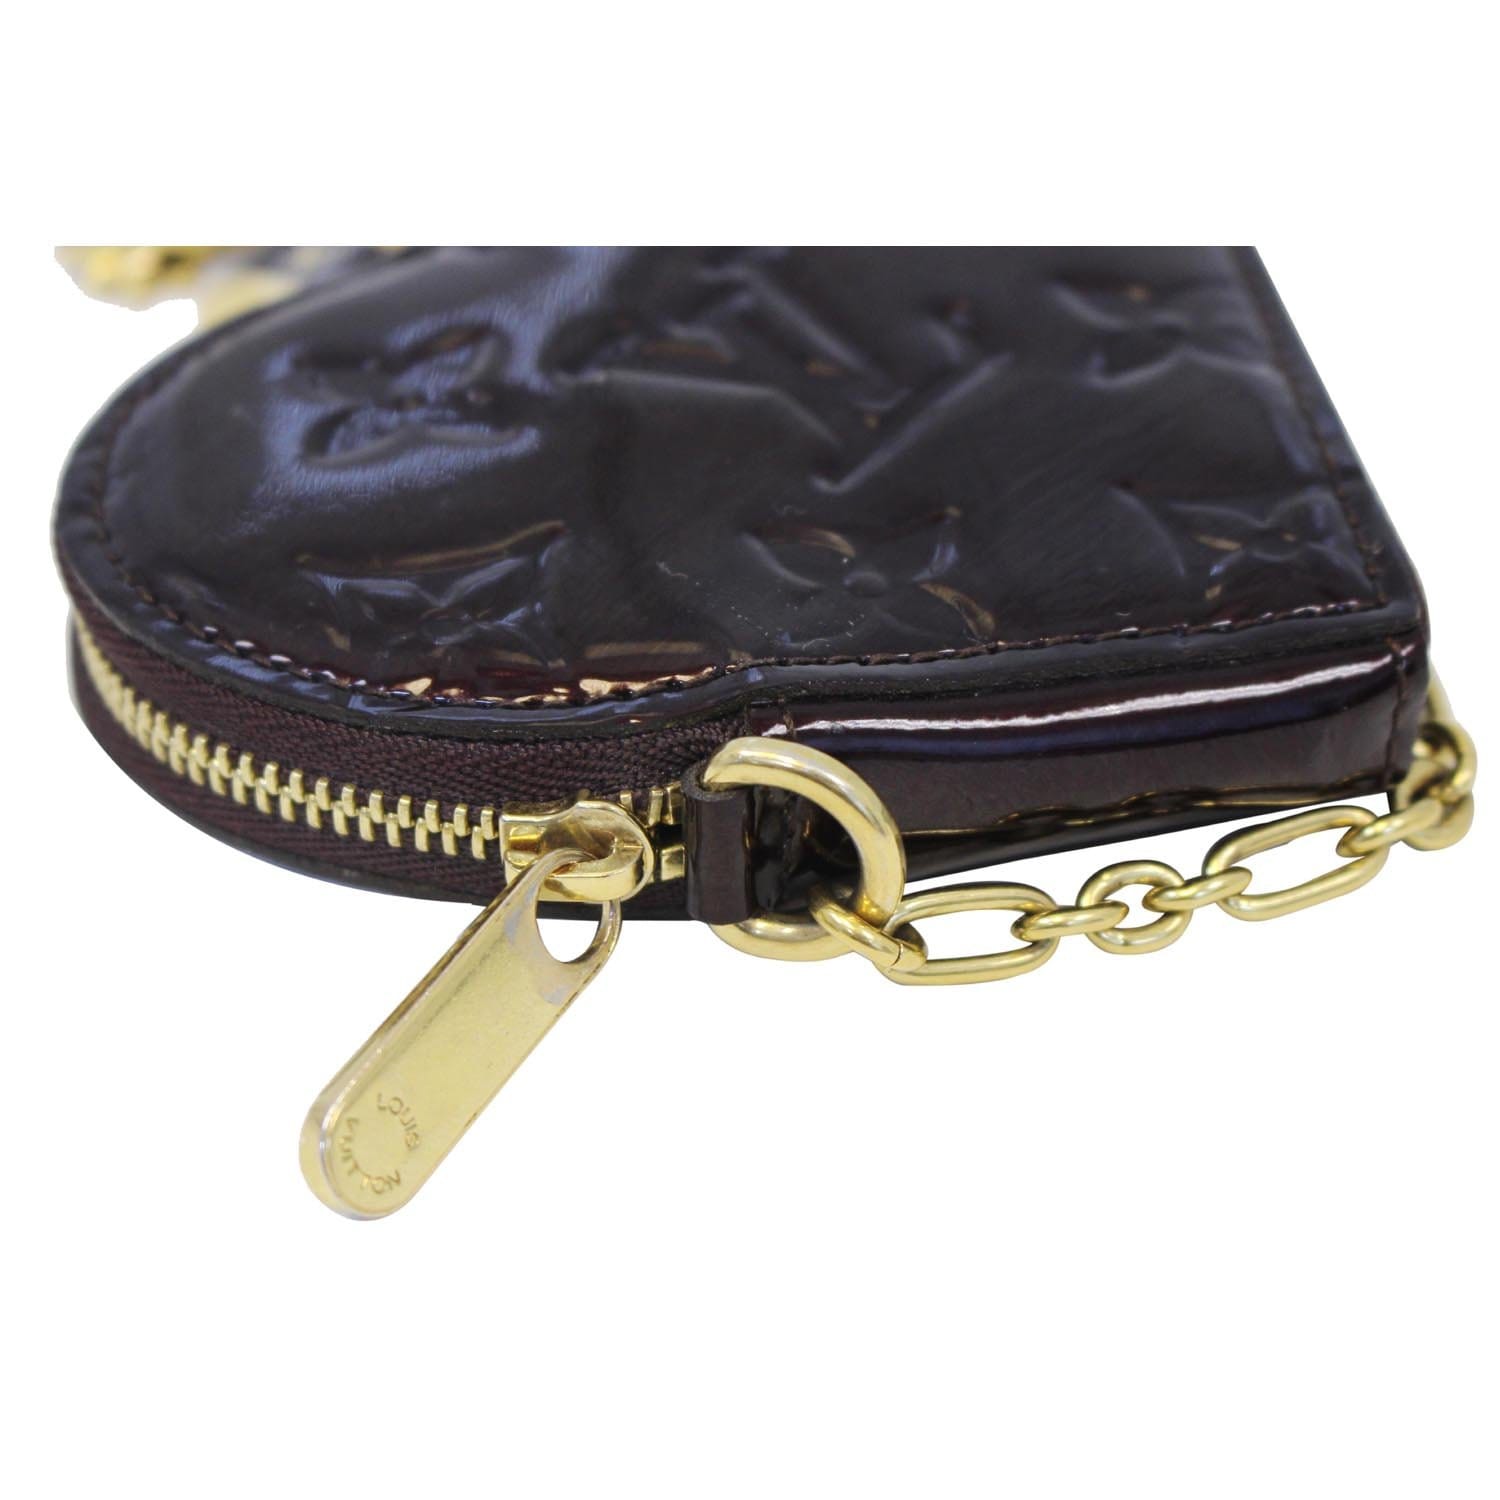 Black leather heart coin purse